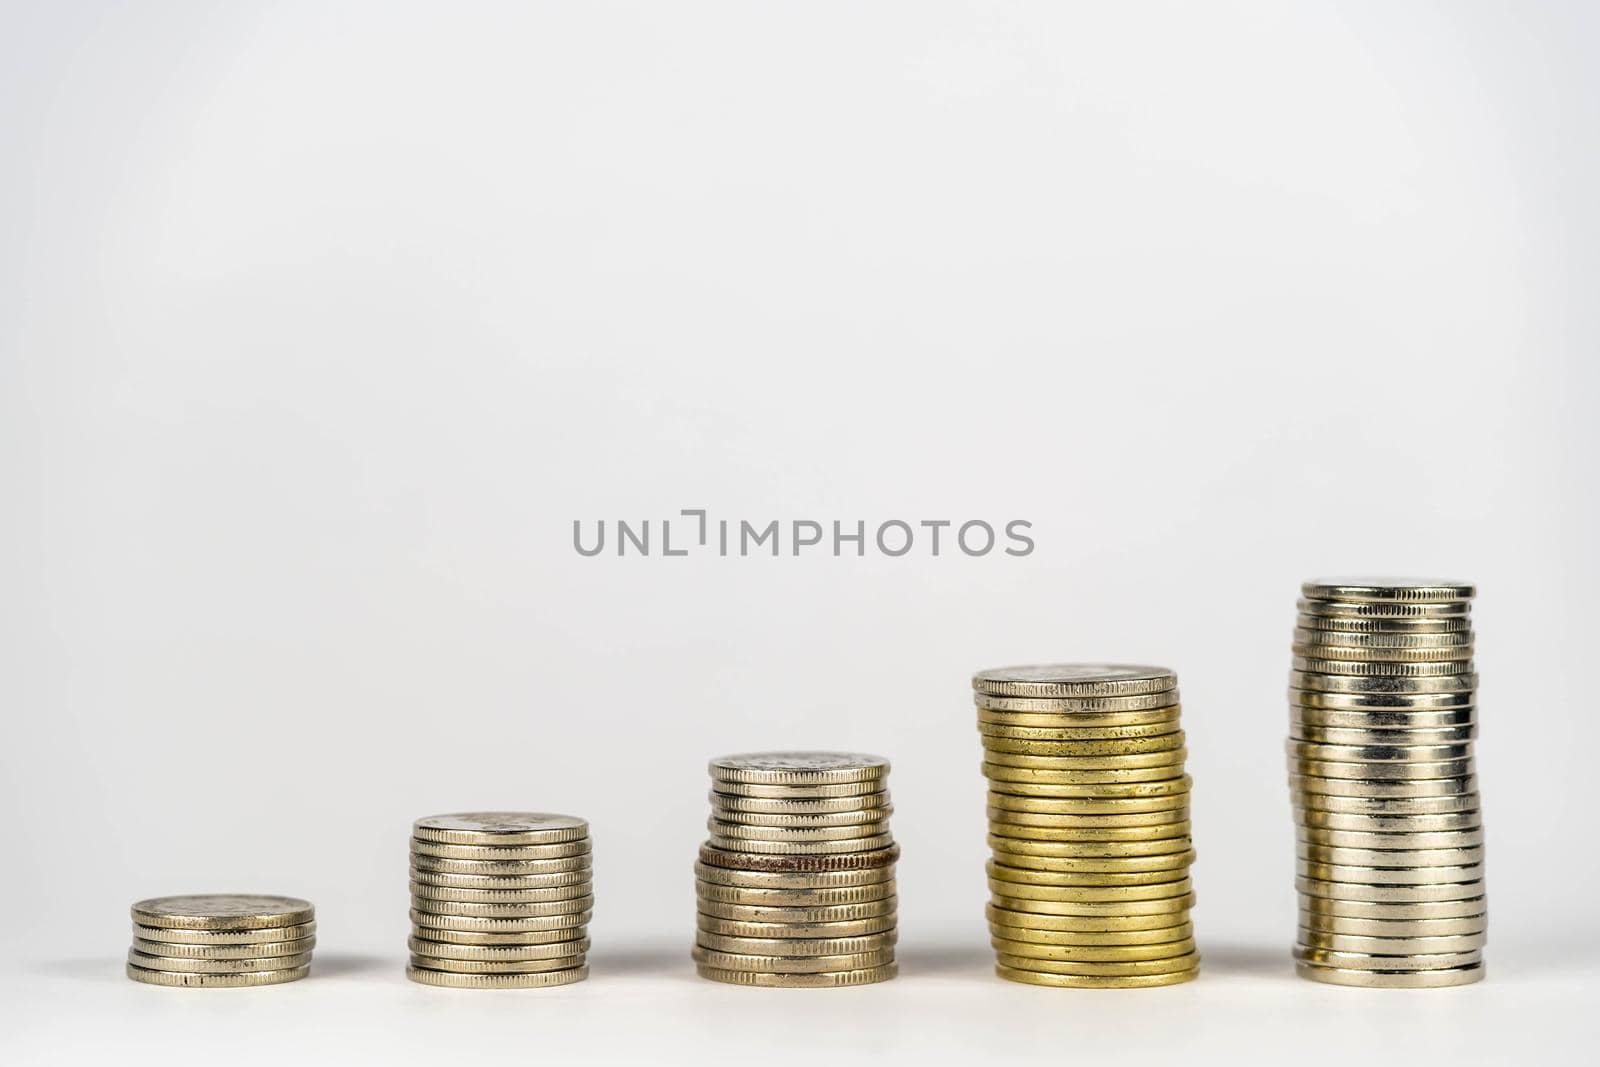 Five stacks of golden coins with different heights arranged in growing direction, isolated on white background